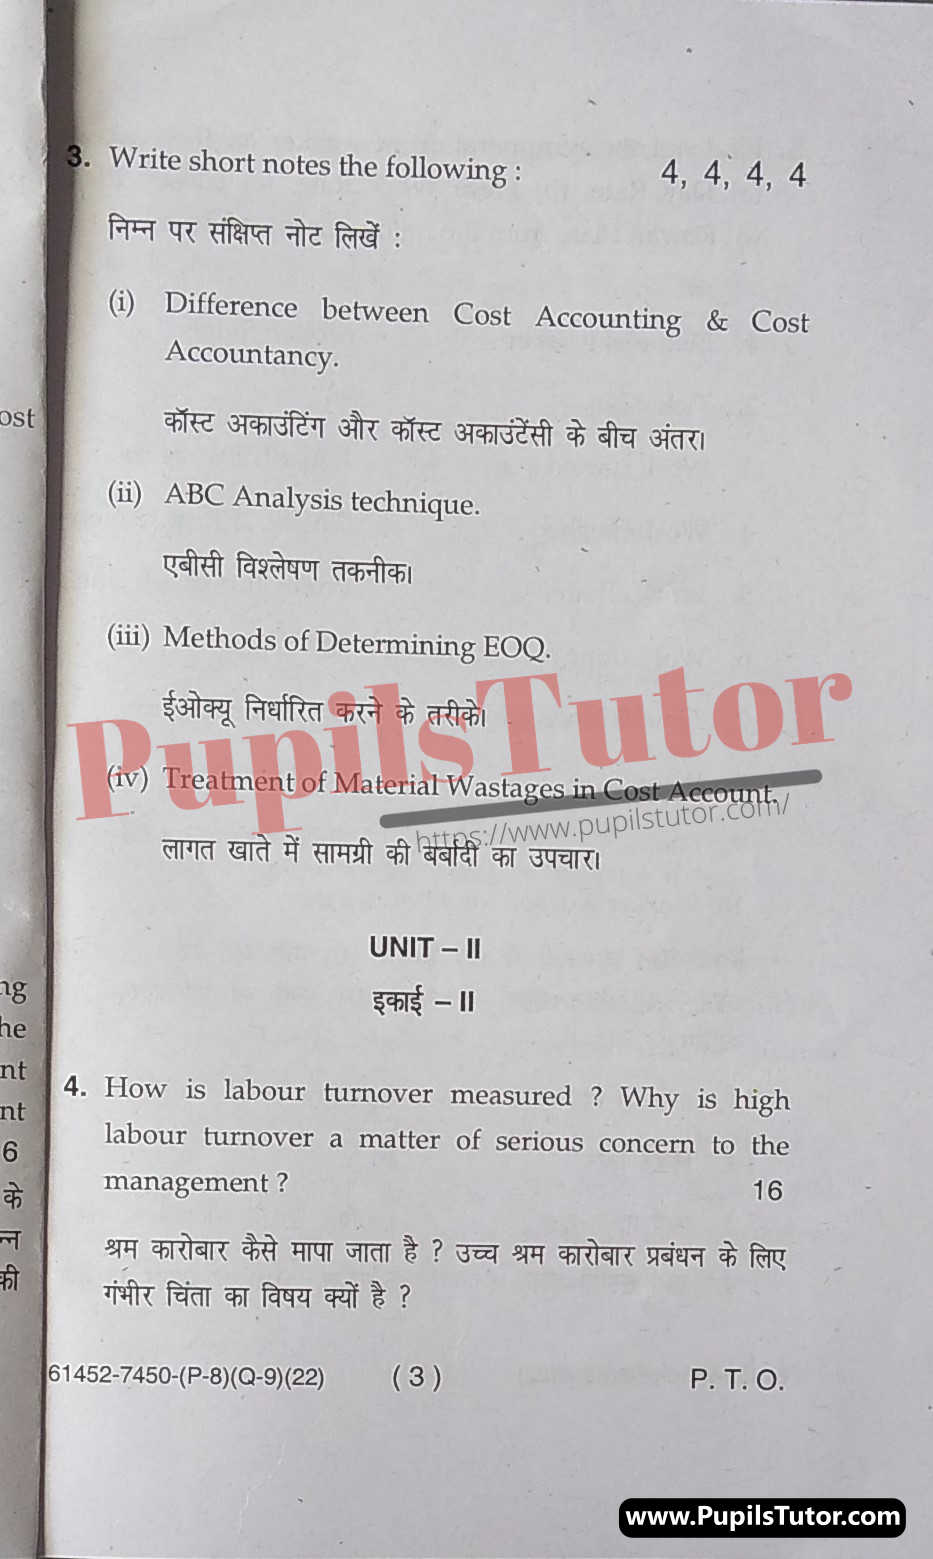 Free Download PDF Of M.D. University B.Com. 5th Semester Latest Question Paper For Cost Accounting Subject (Page 3) - https://www.pupilstutor.com